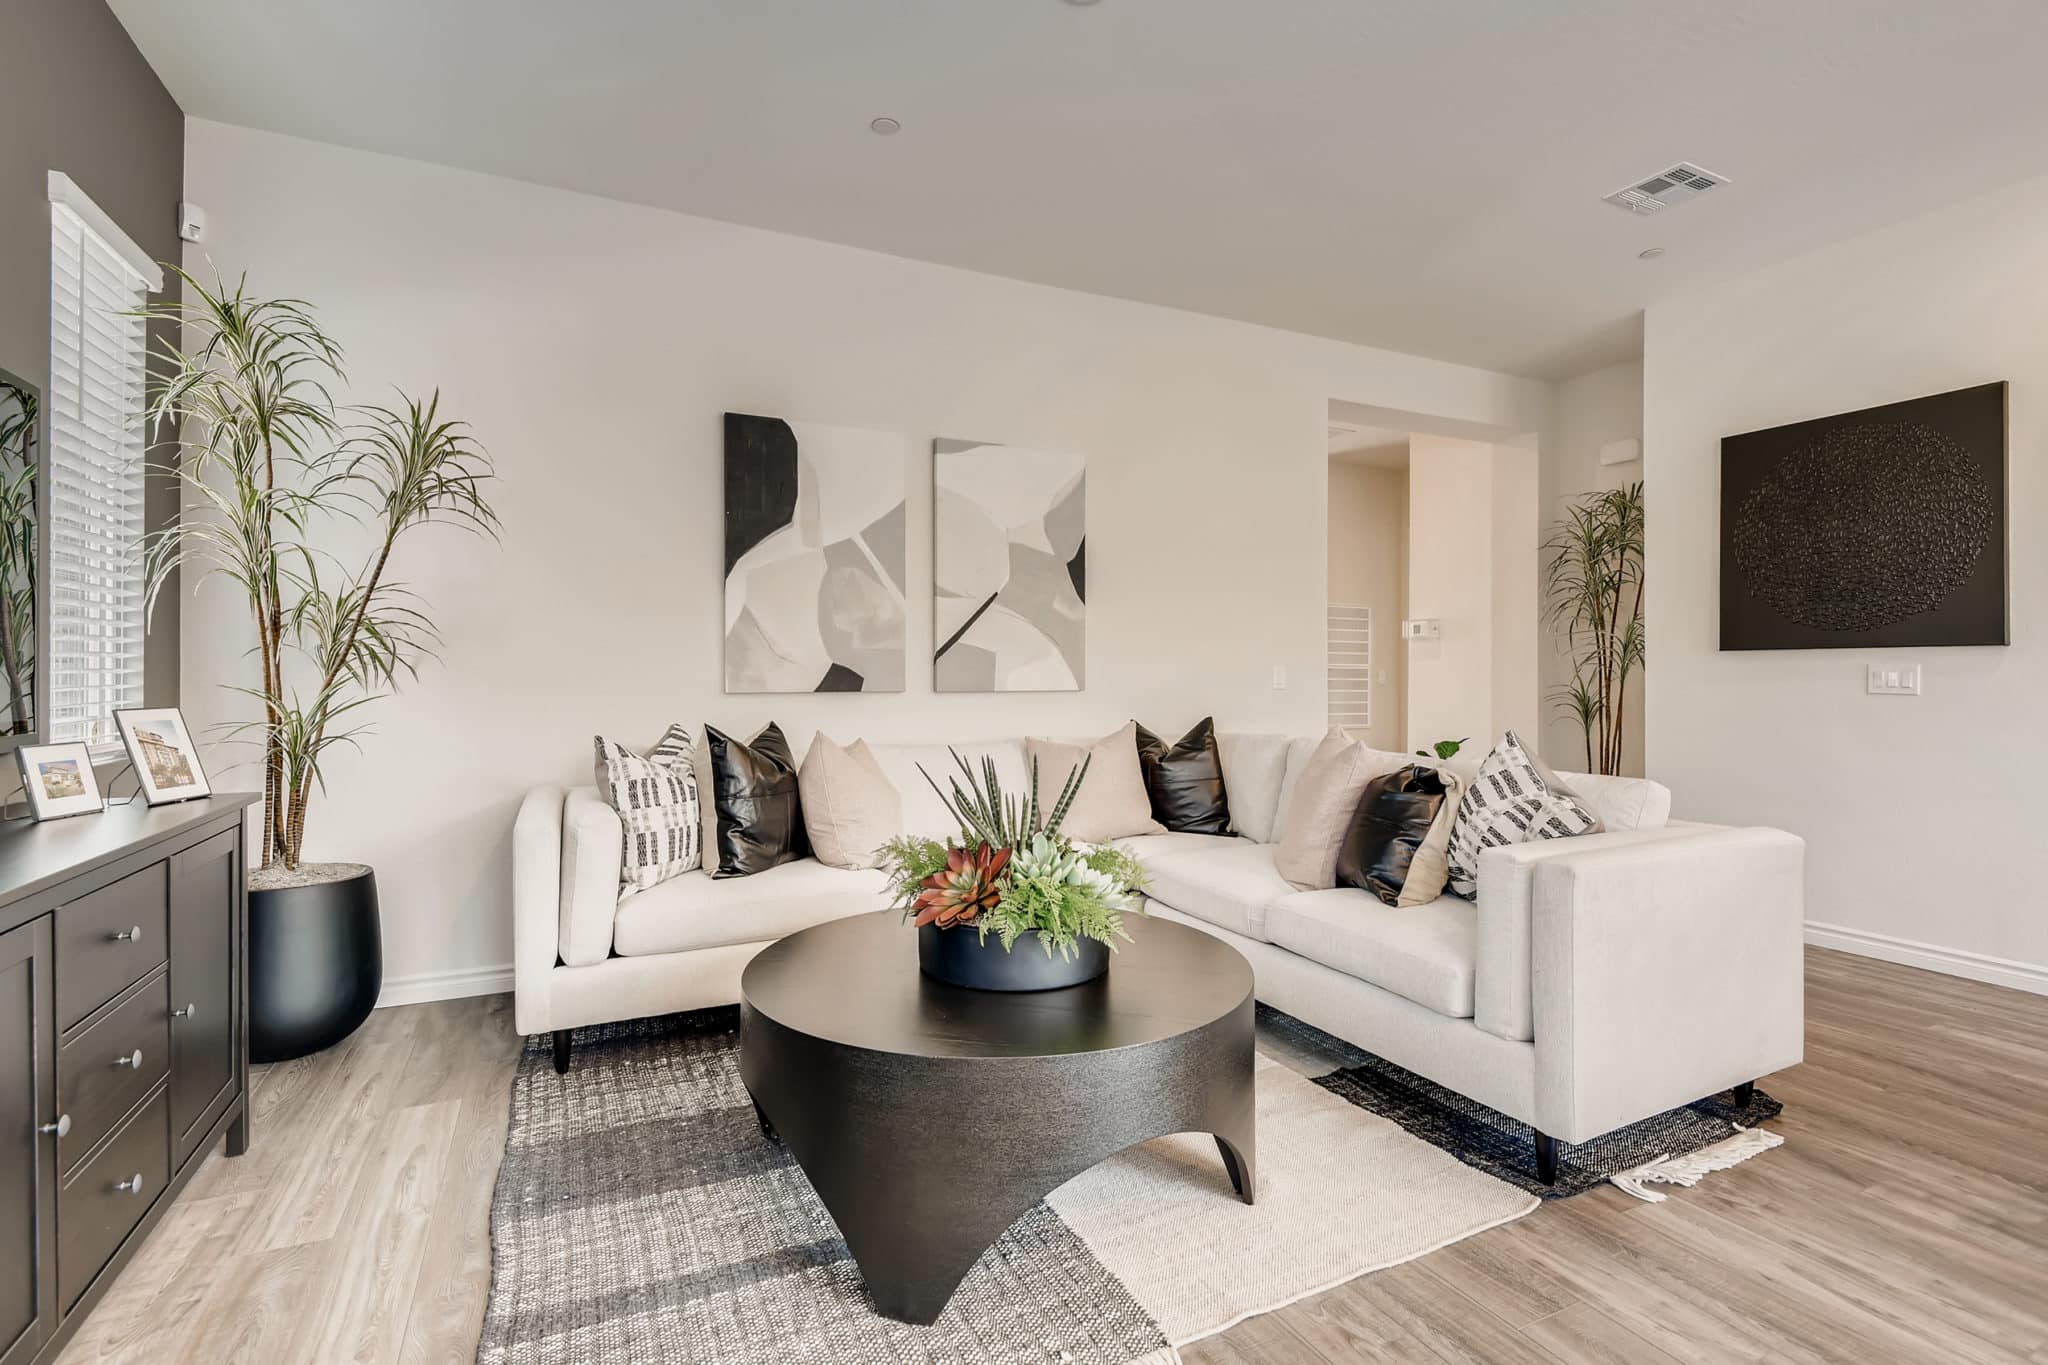 Living Room of Claremont model at Heritage by Lennar